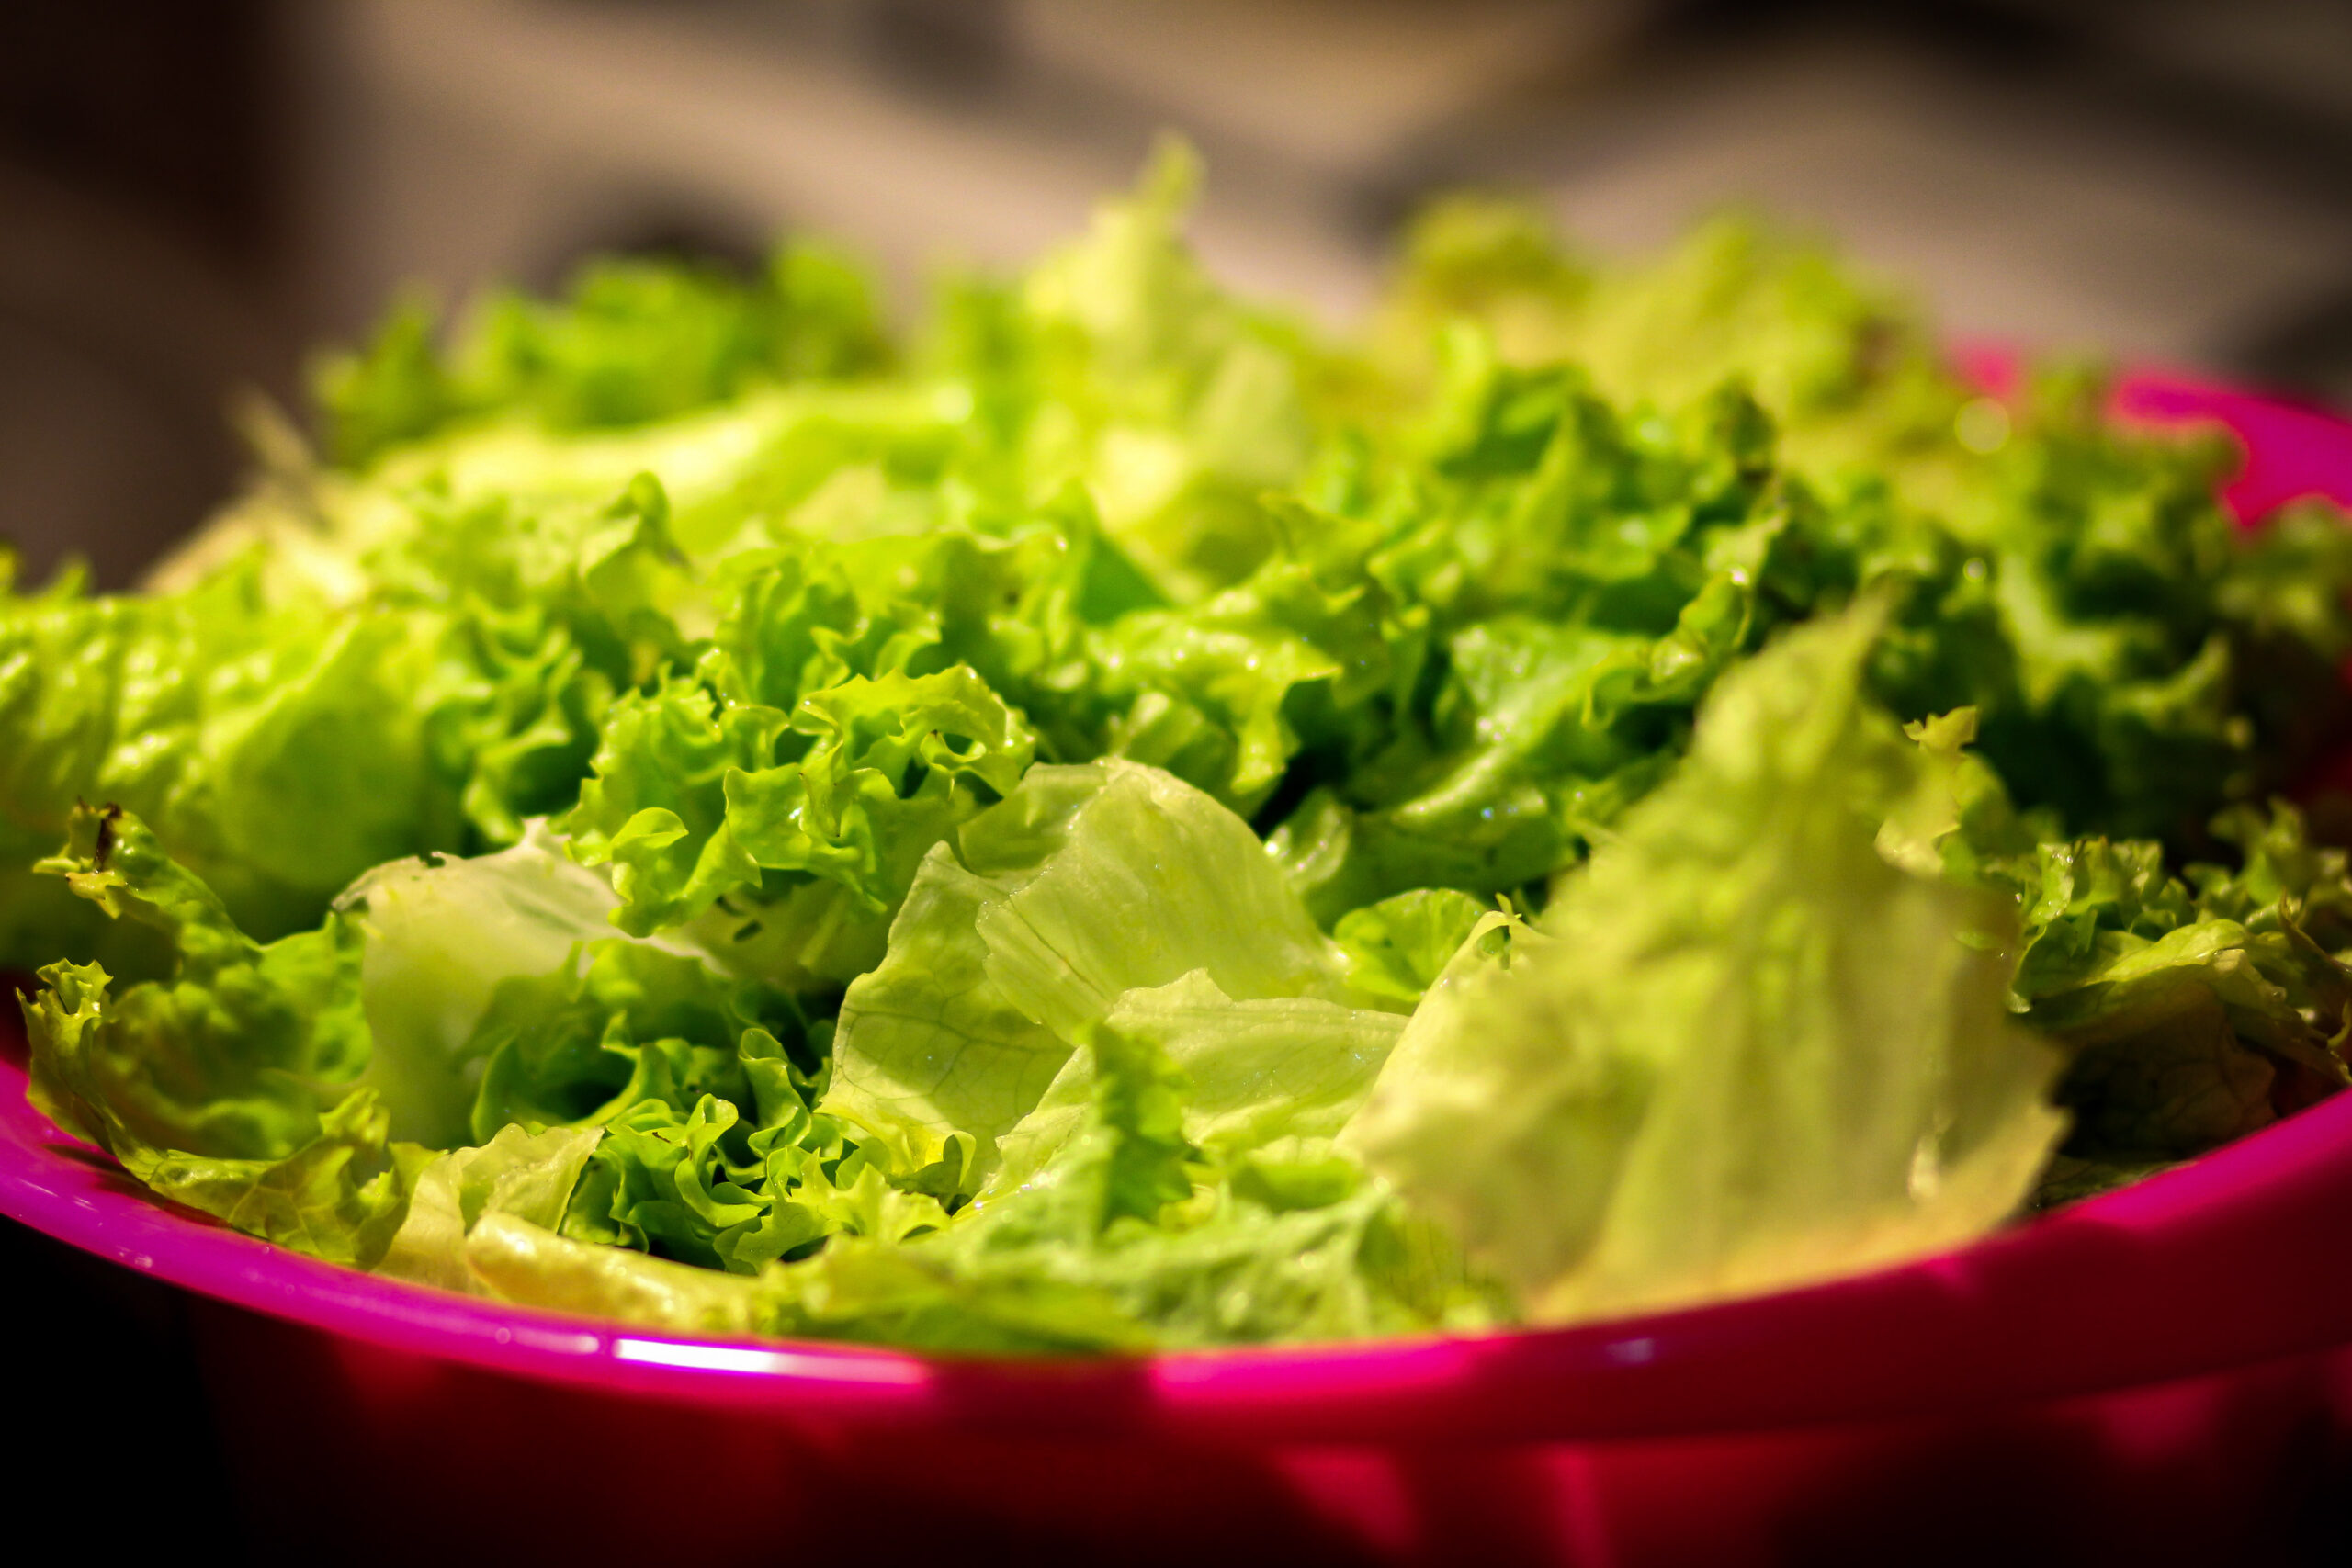 Close-up view of green lettuce in pink bowl